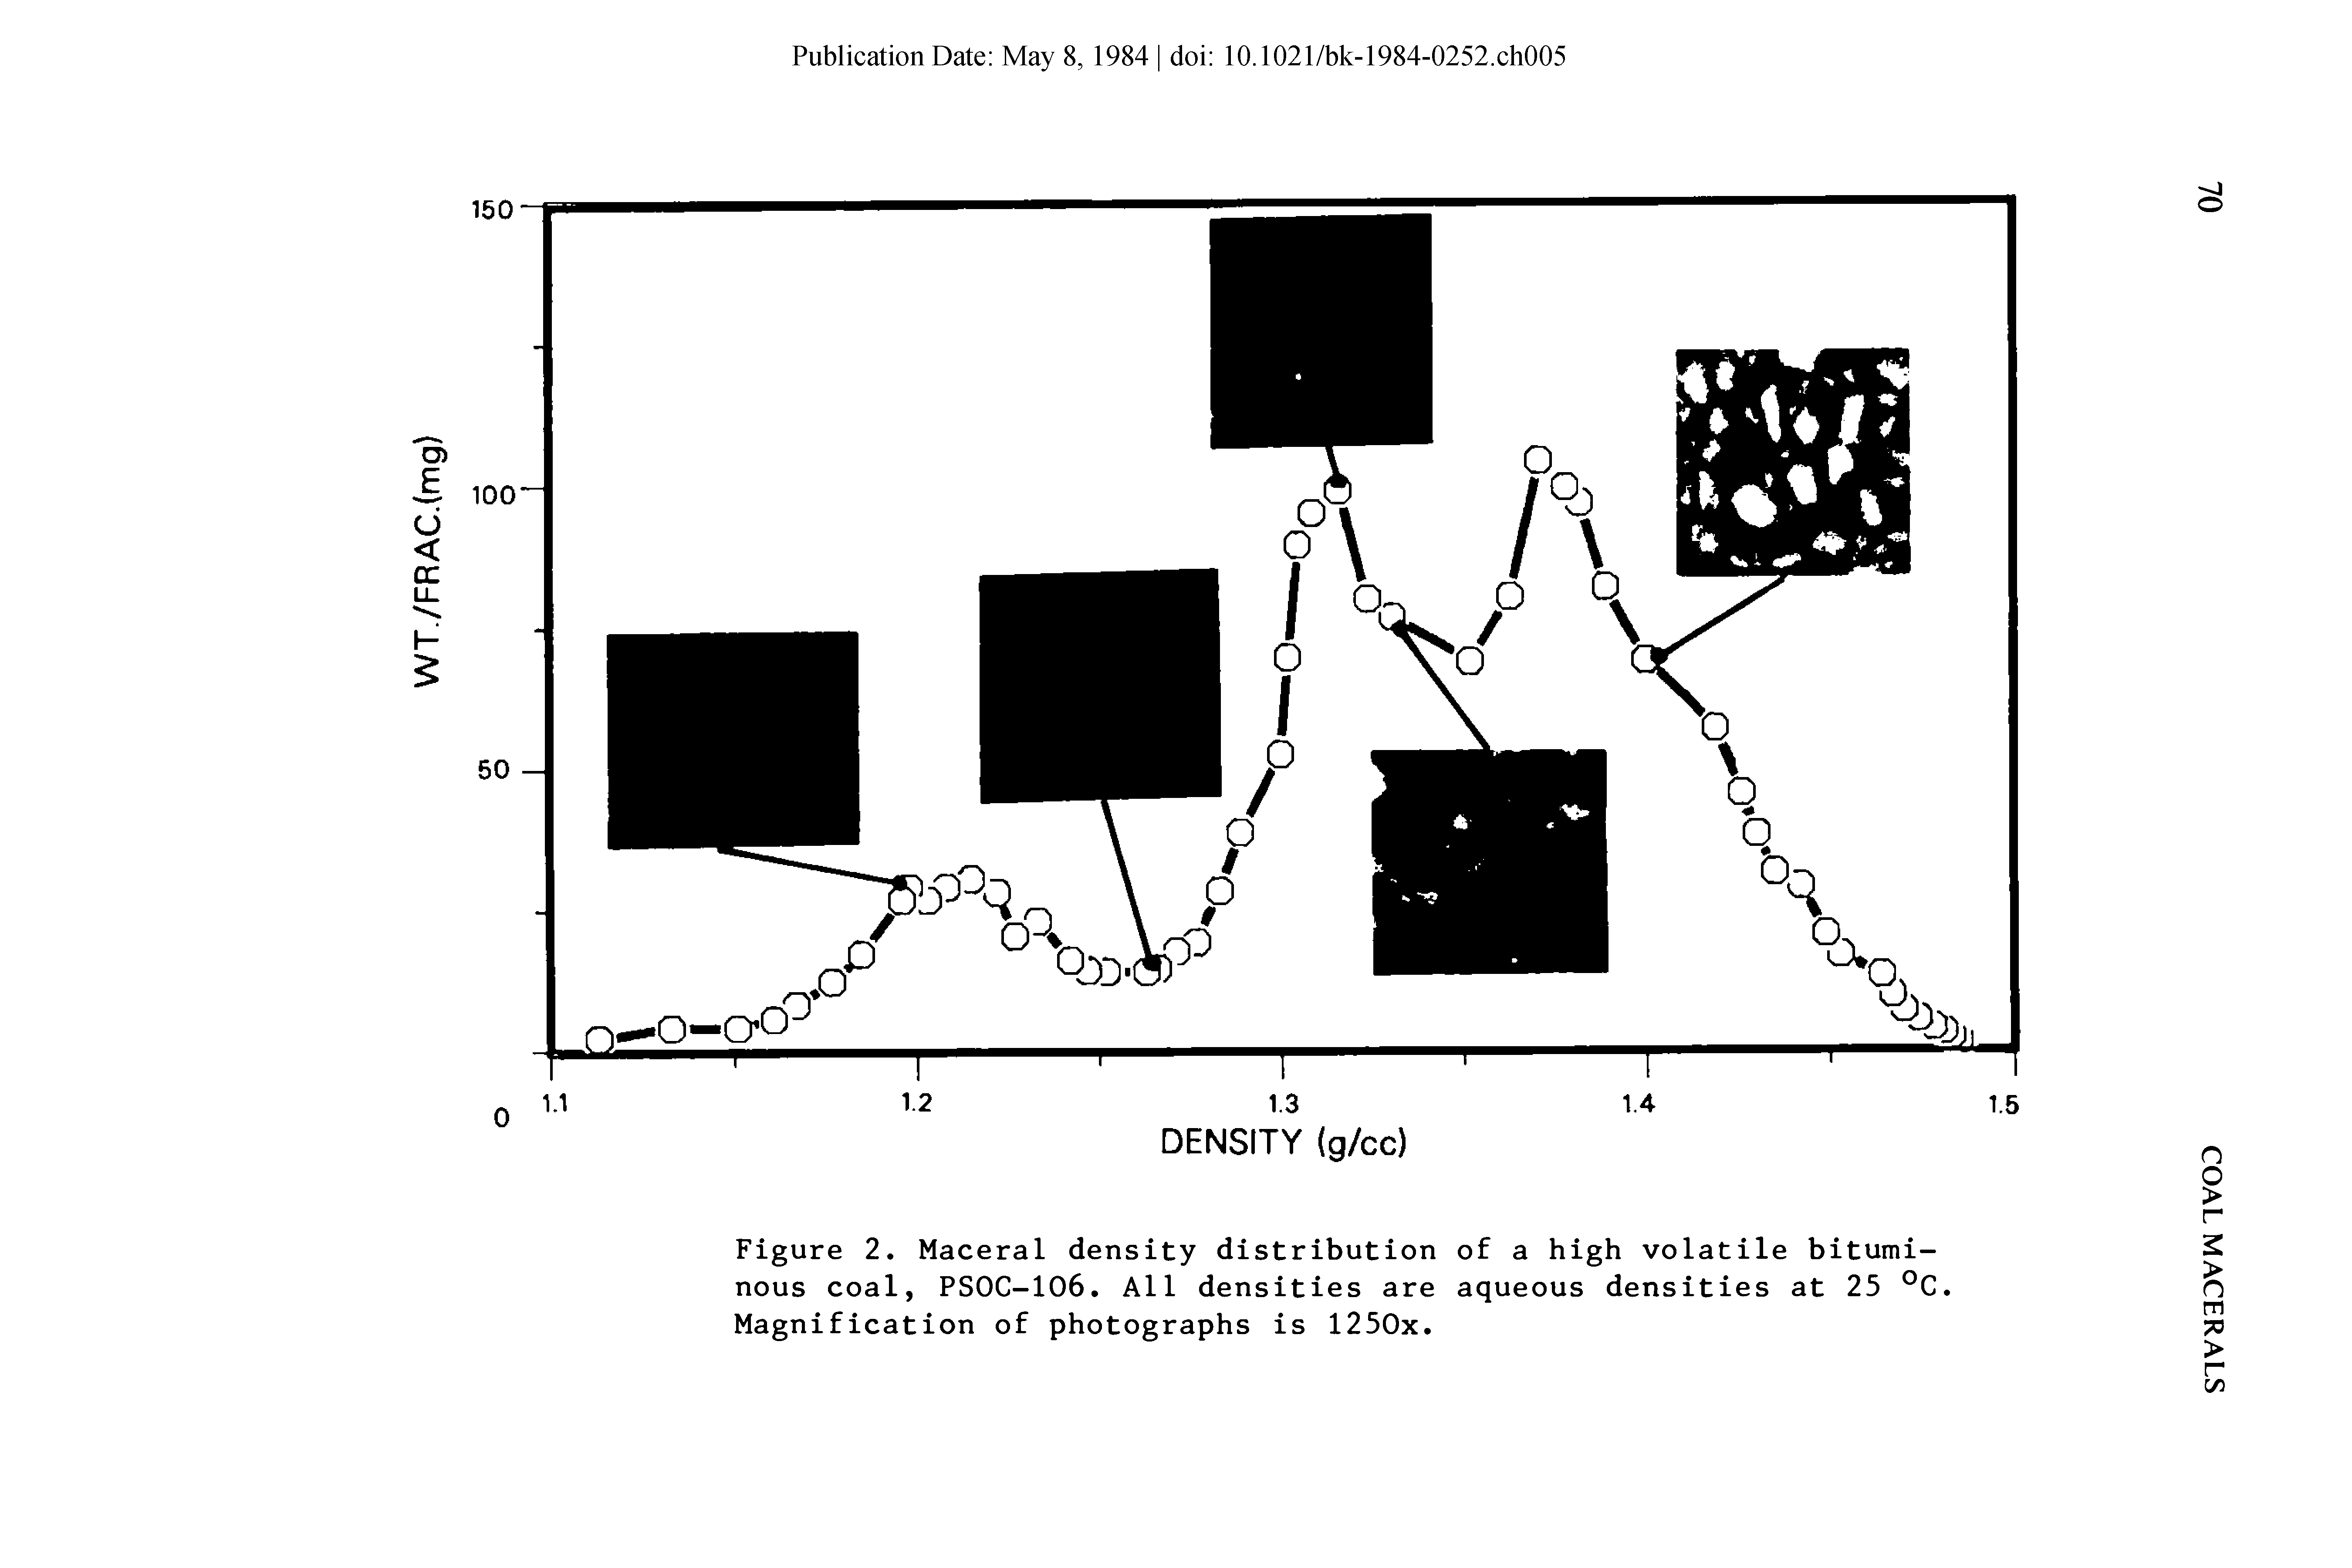 Figure 2. Maceral density distribution of a high volatile bituminous coal, PS0C-106. All densities are aqueous densities at 25 °C. Magnification of photographs is 1250x.